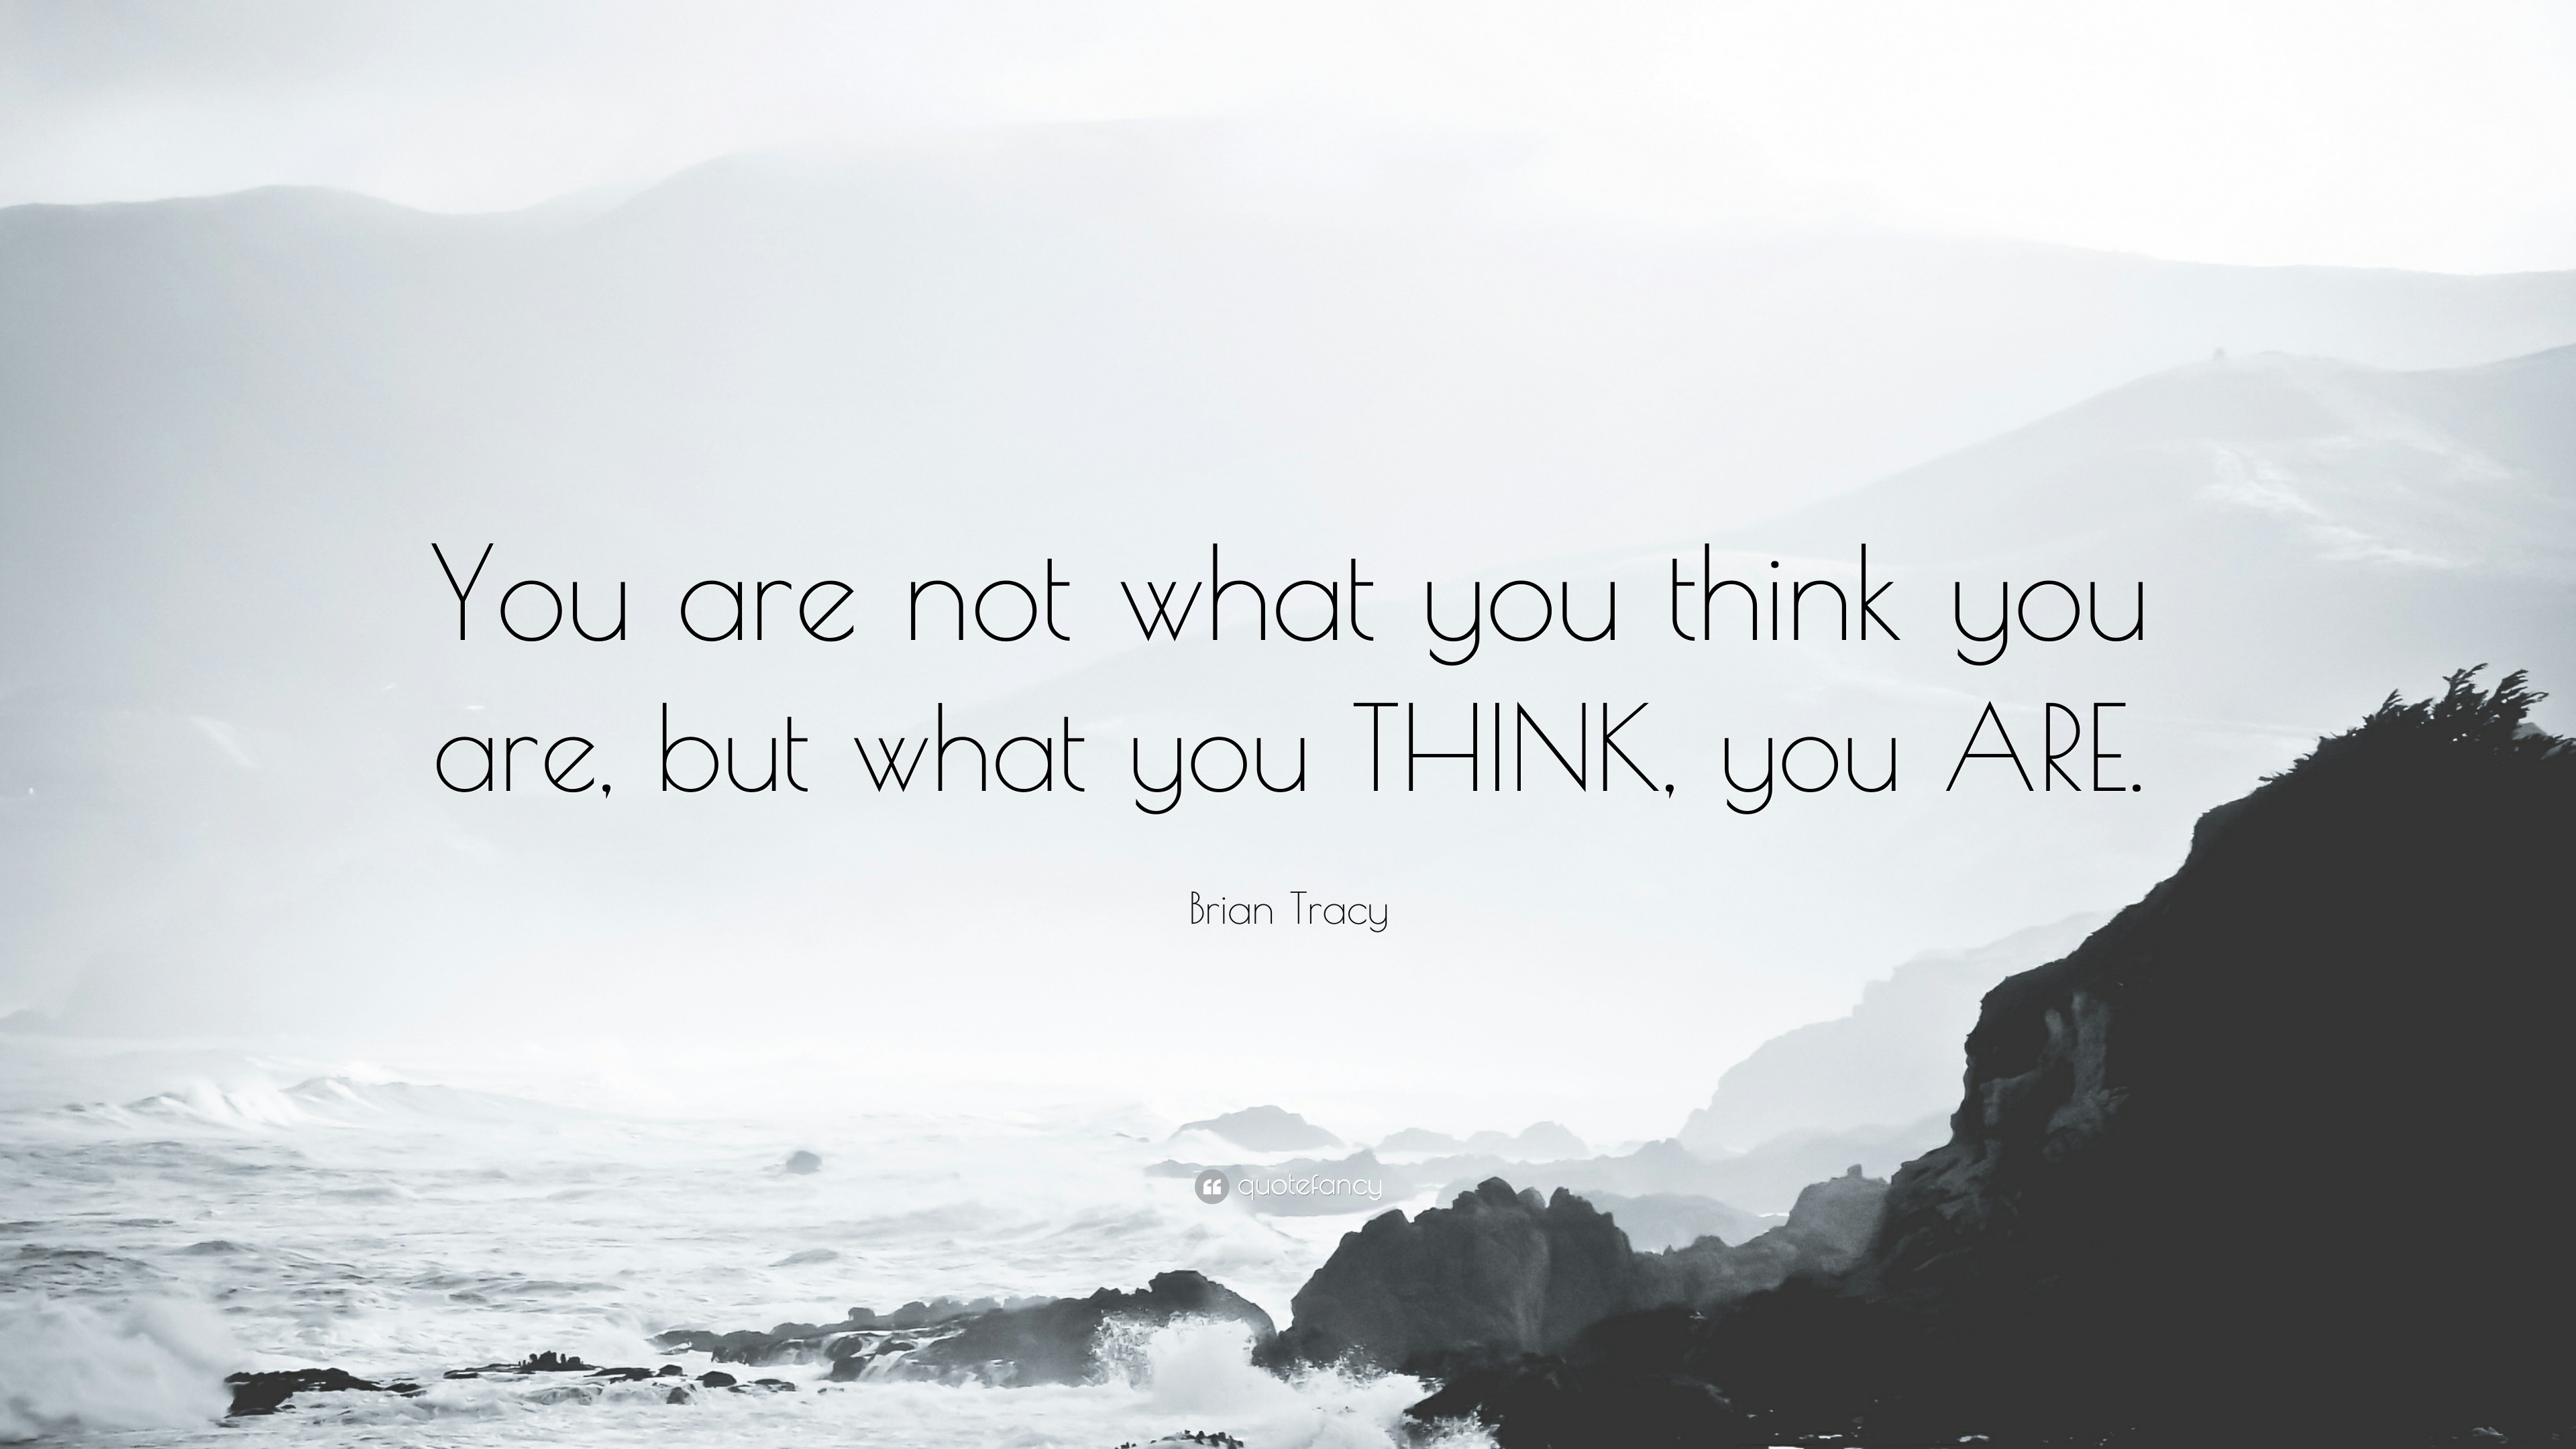 Brian Tracy Quote: “You Are Not What You Think You Are, But What You Think, You